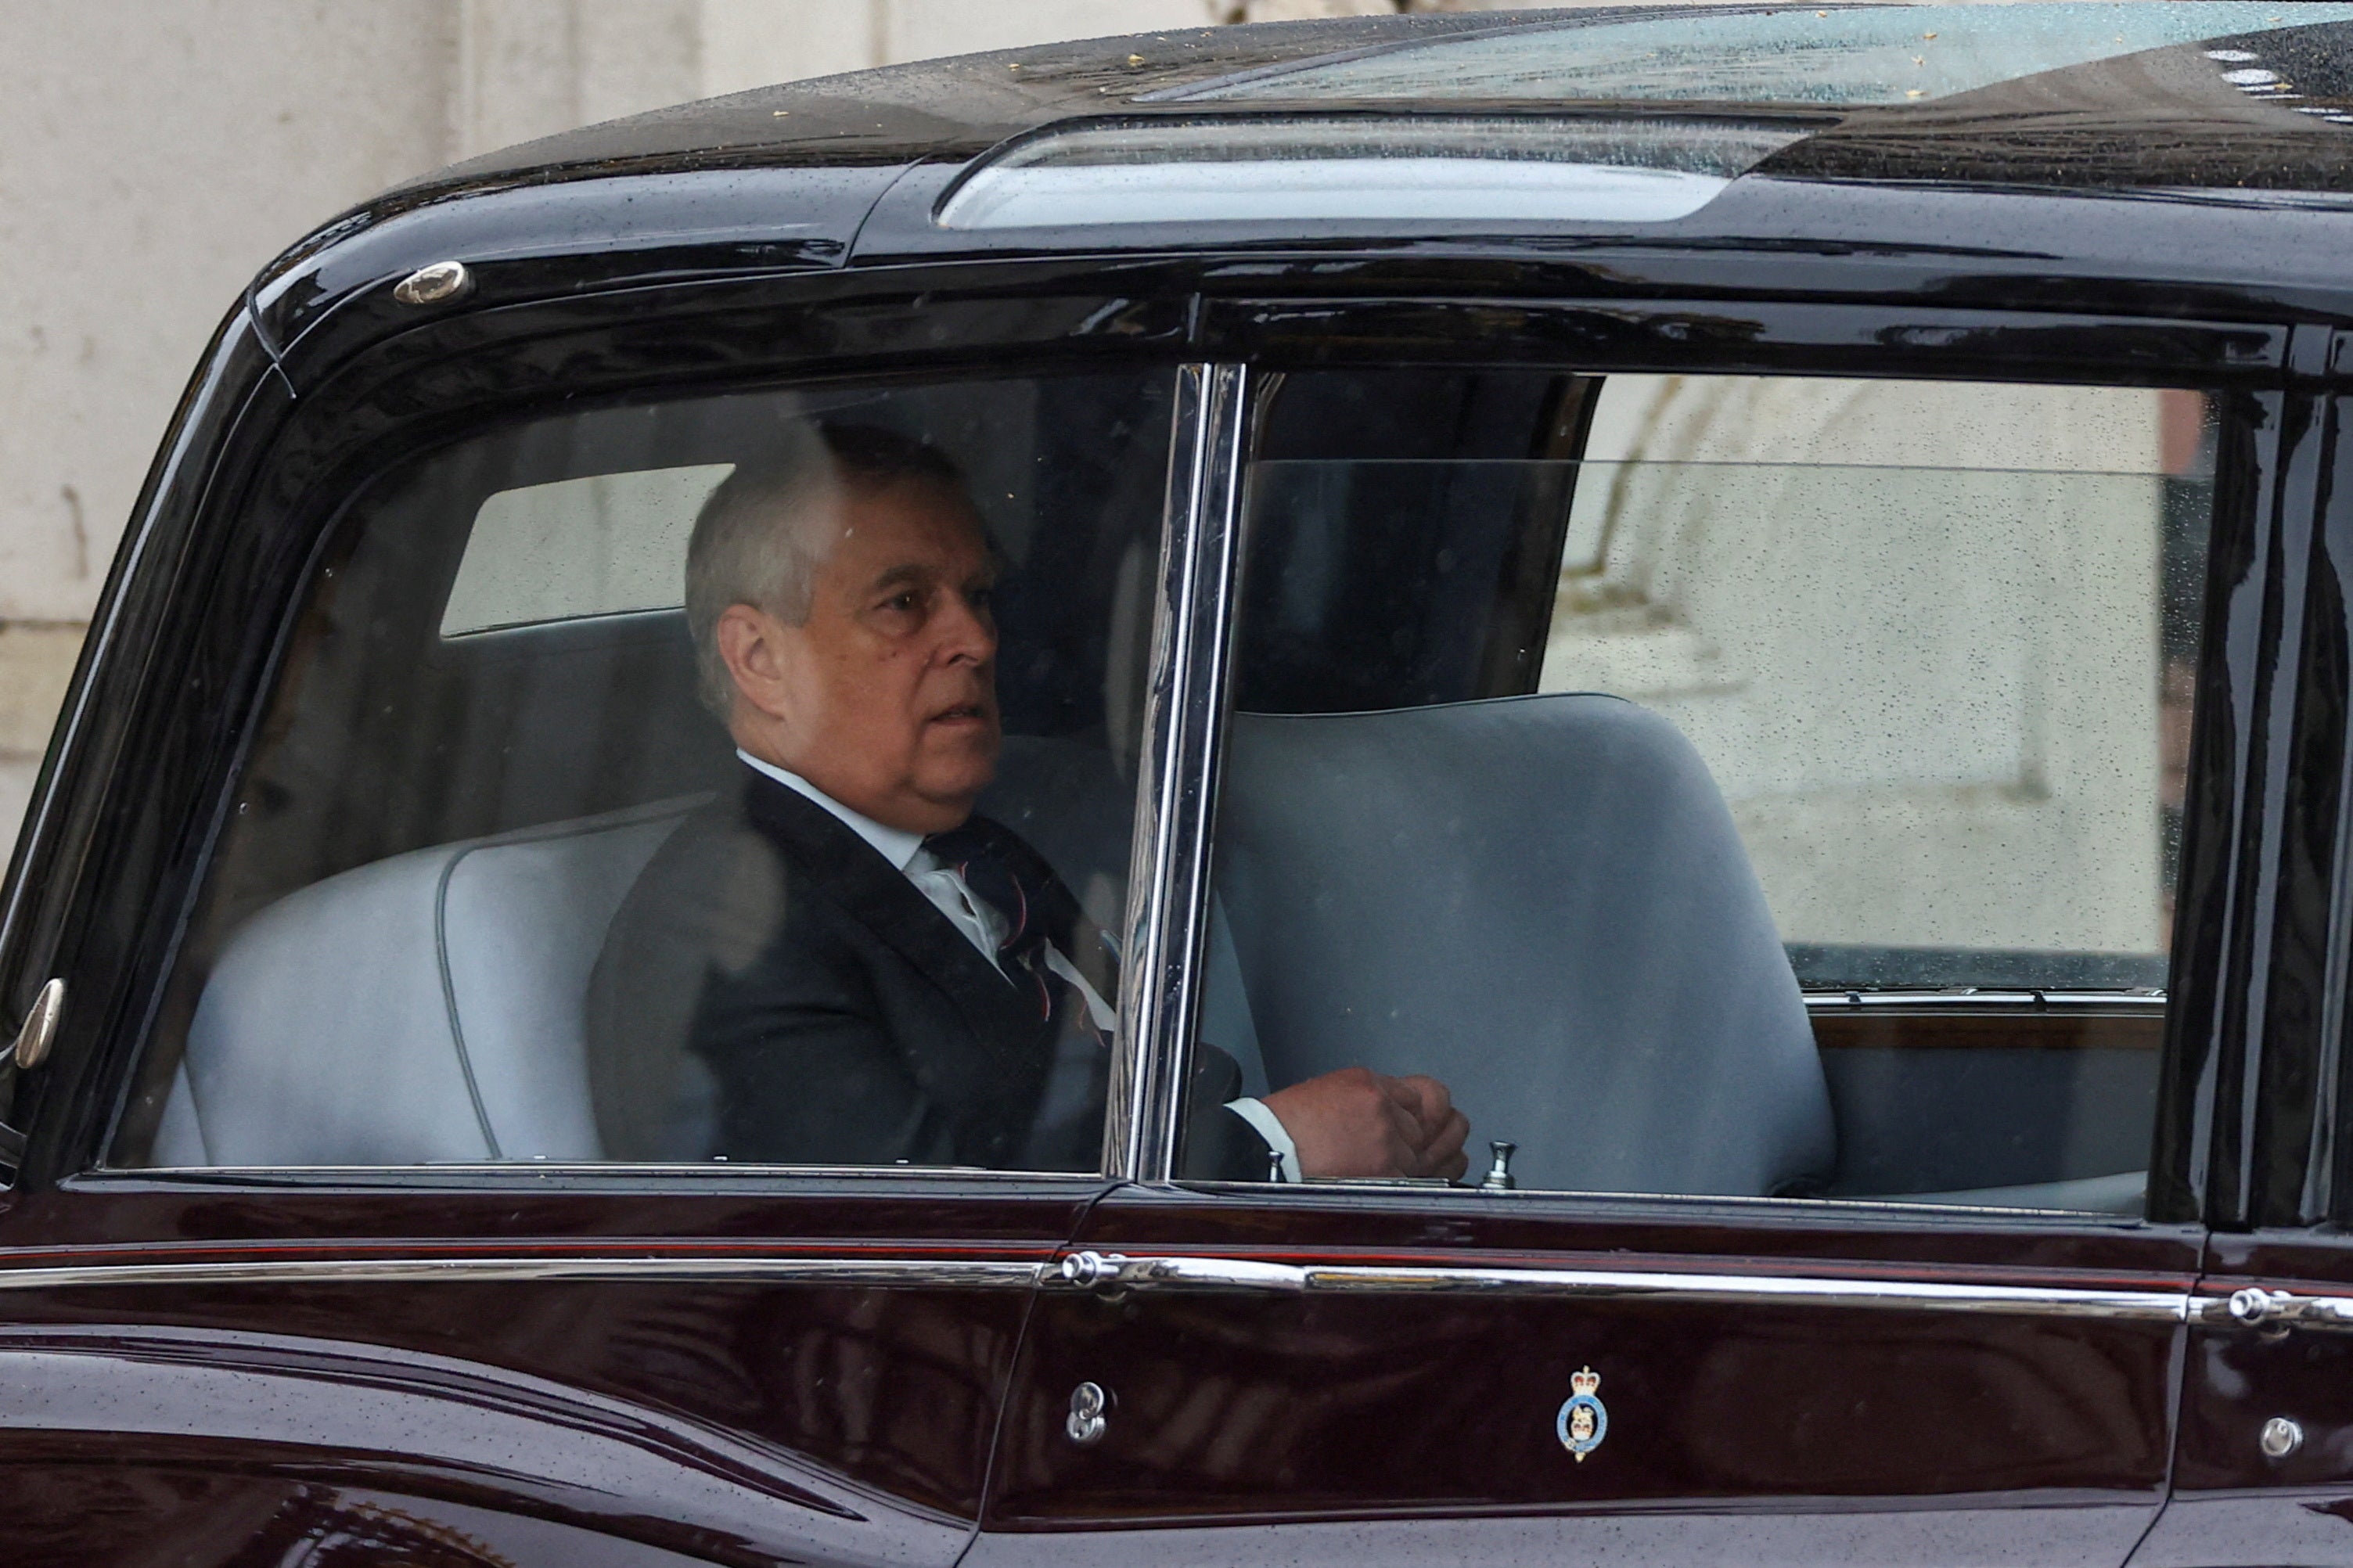 Documents relating to the Duke of York’s business trips won’t be released by the Foreign Office until 2065